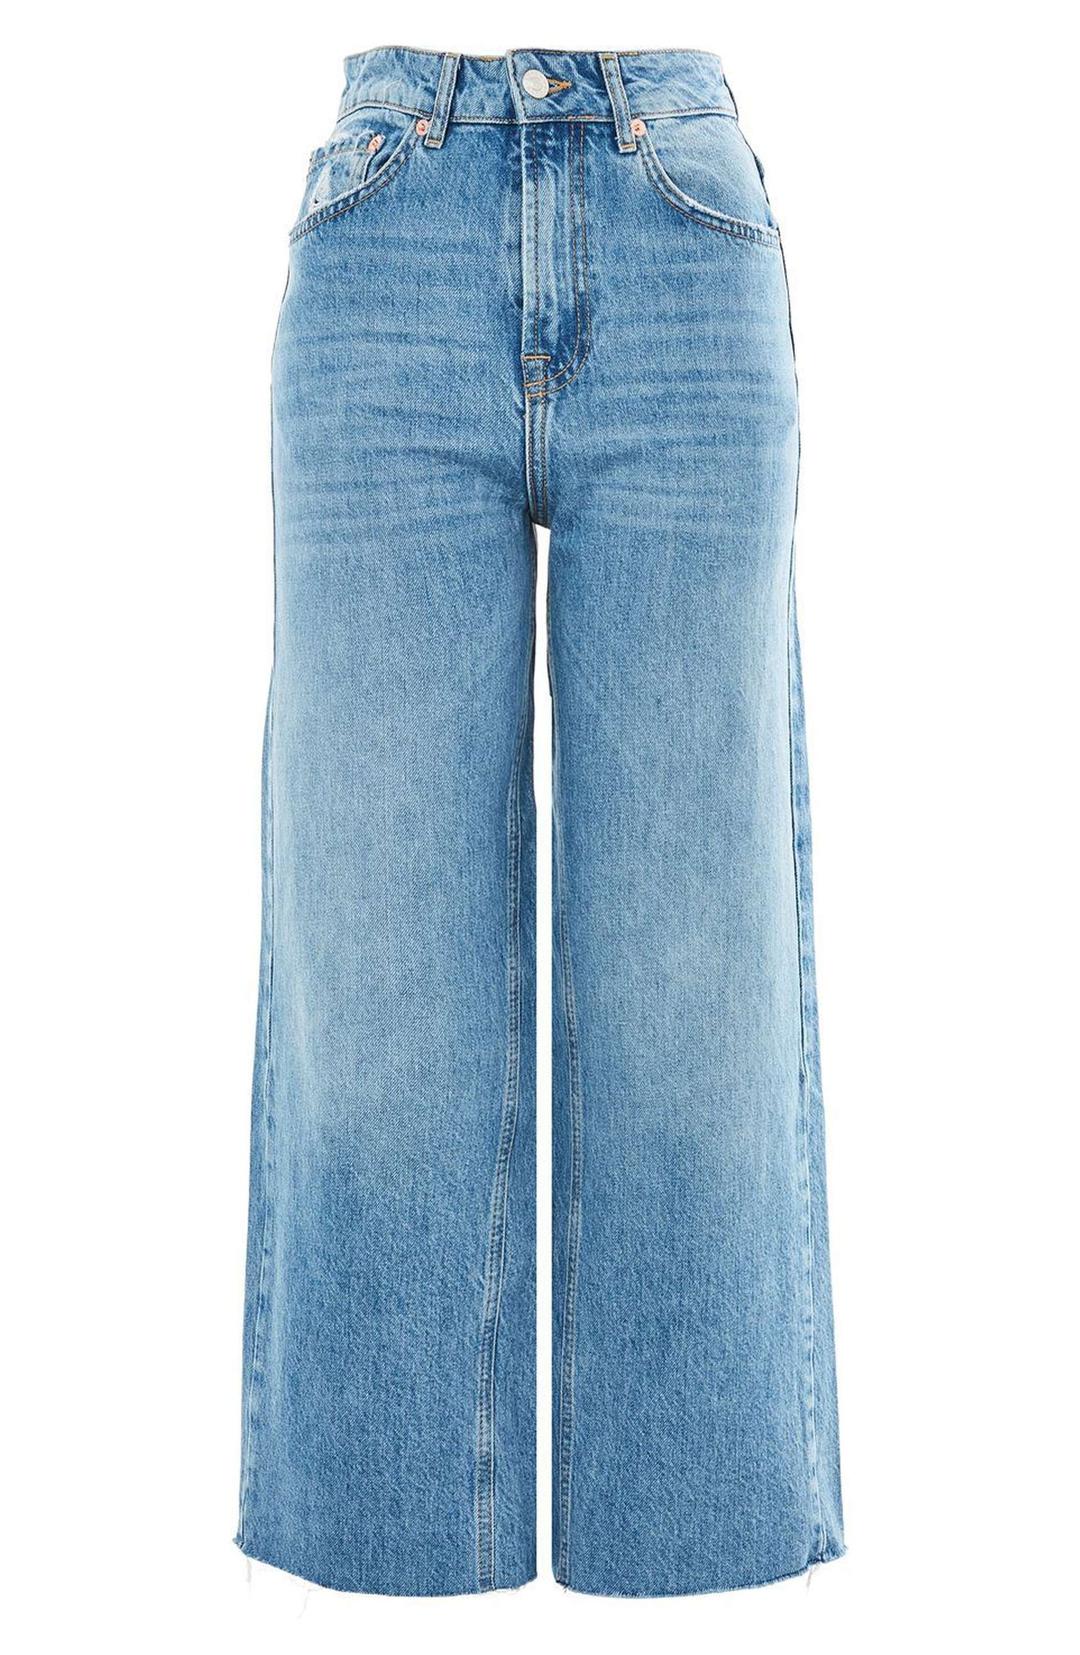 Ditch Your Standard Skinnies for These Wide-Leg Jeans | Who What Wear